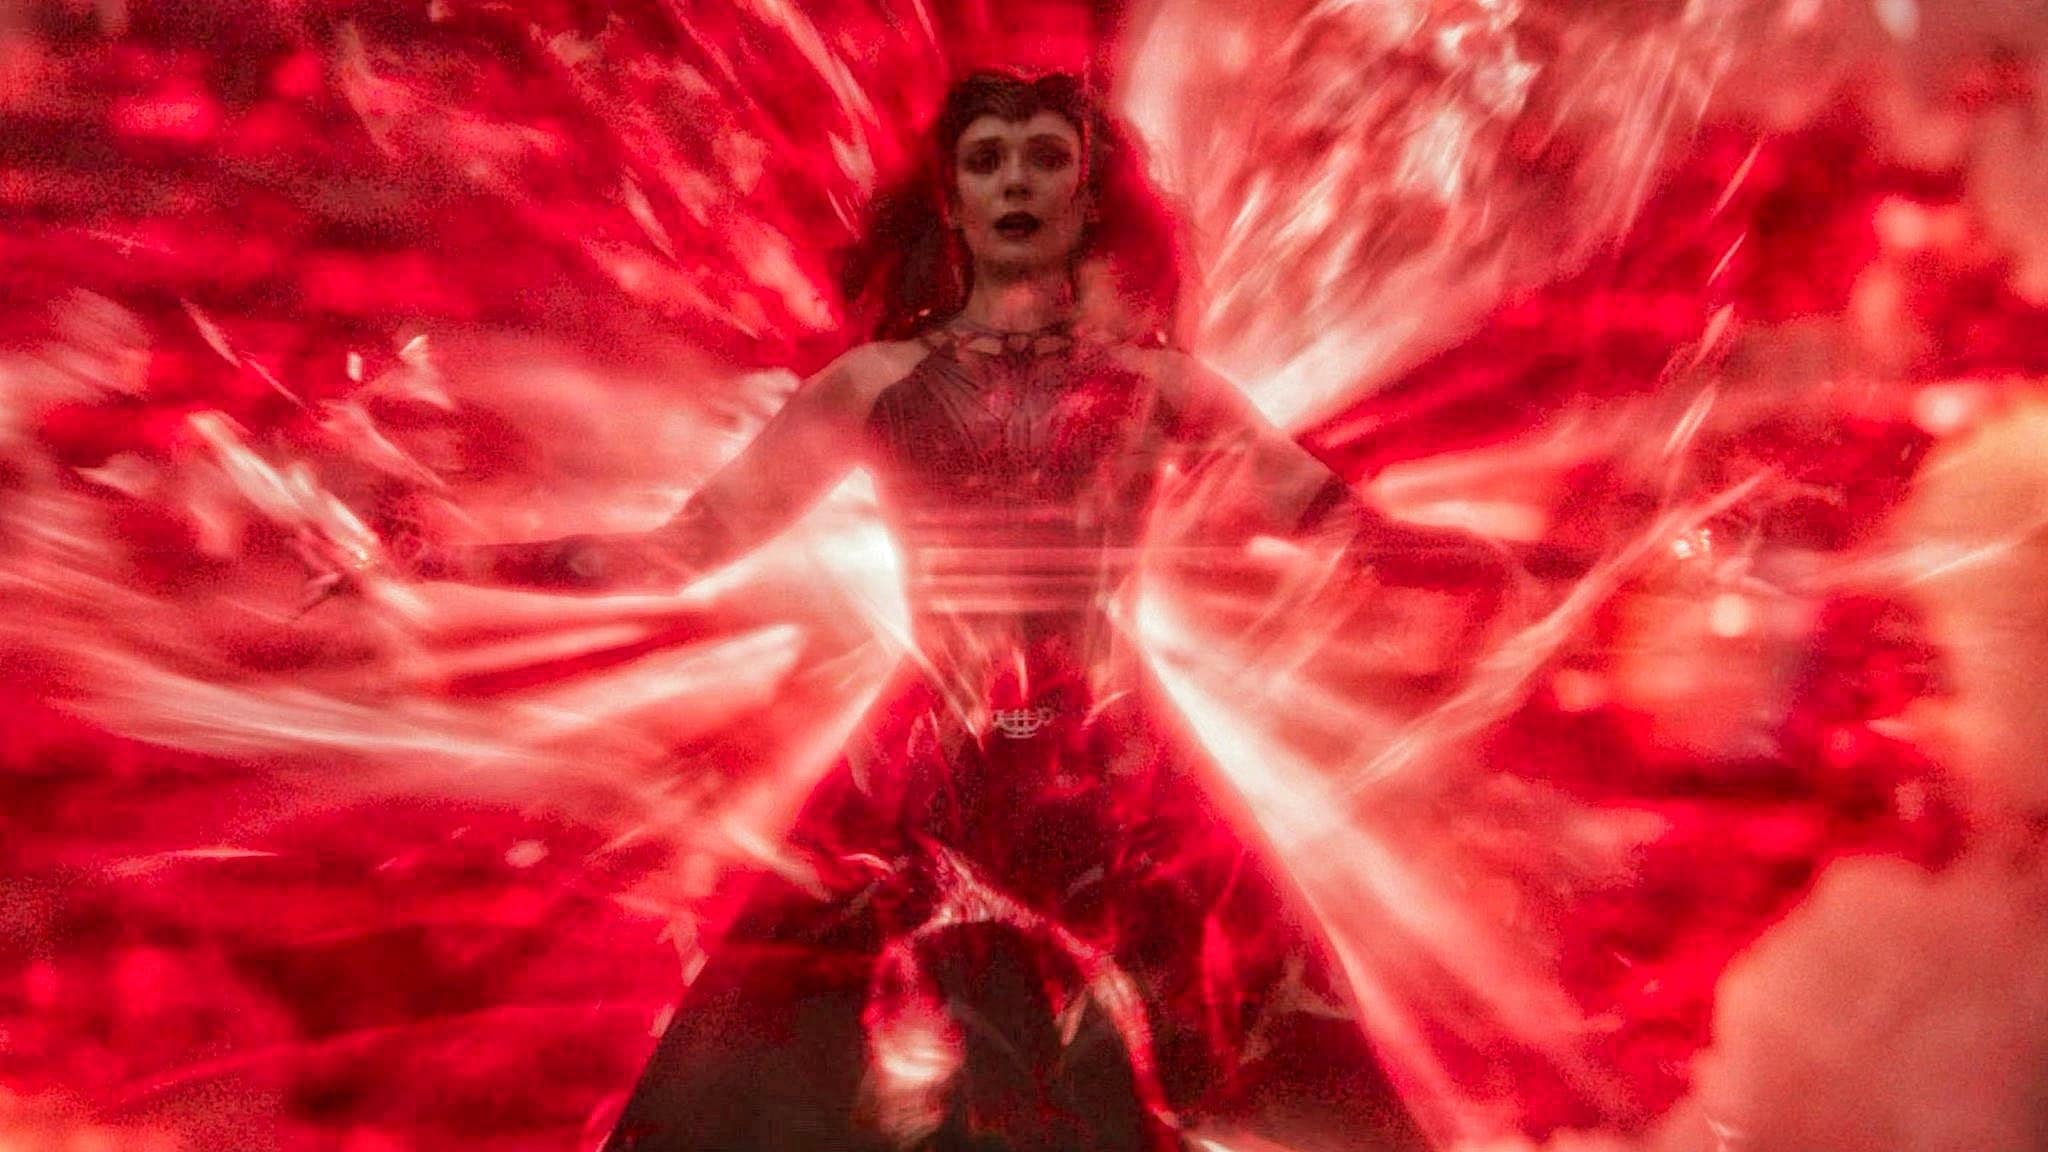 VIDEO: What's Next for The Scarlet Witch in the Marvel Cinematic Universe? - The Illuminerdi